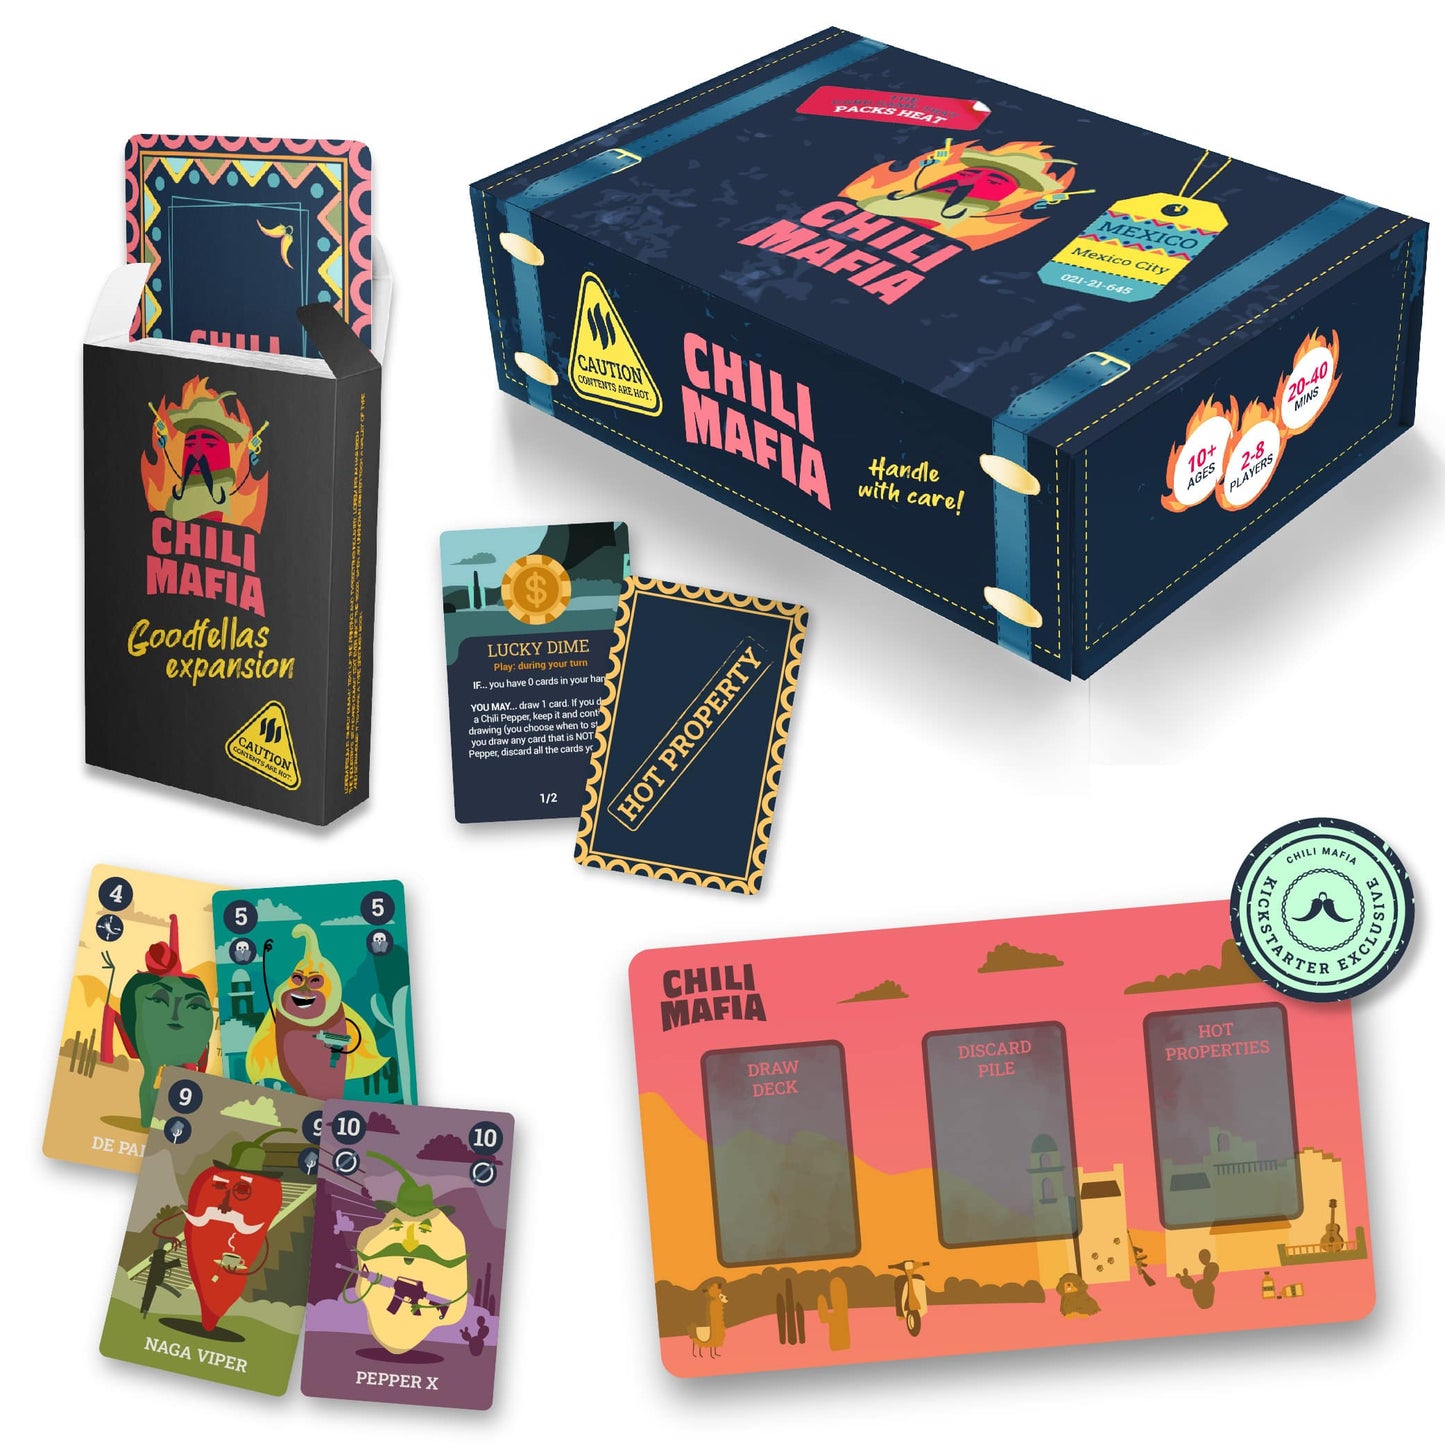 Chili Mafa - the card game that packs heat, Goodfellas expansion and playmat